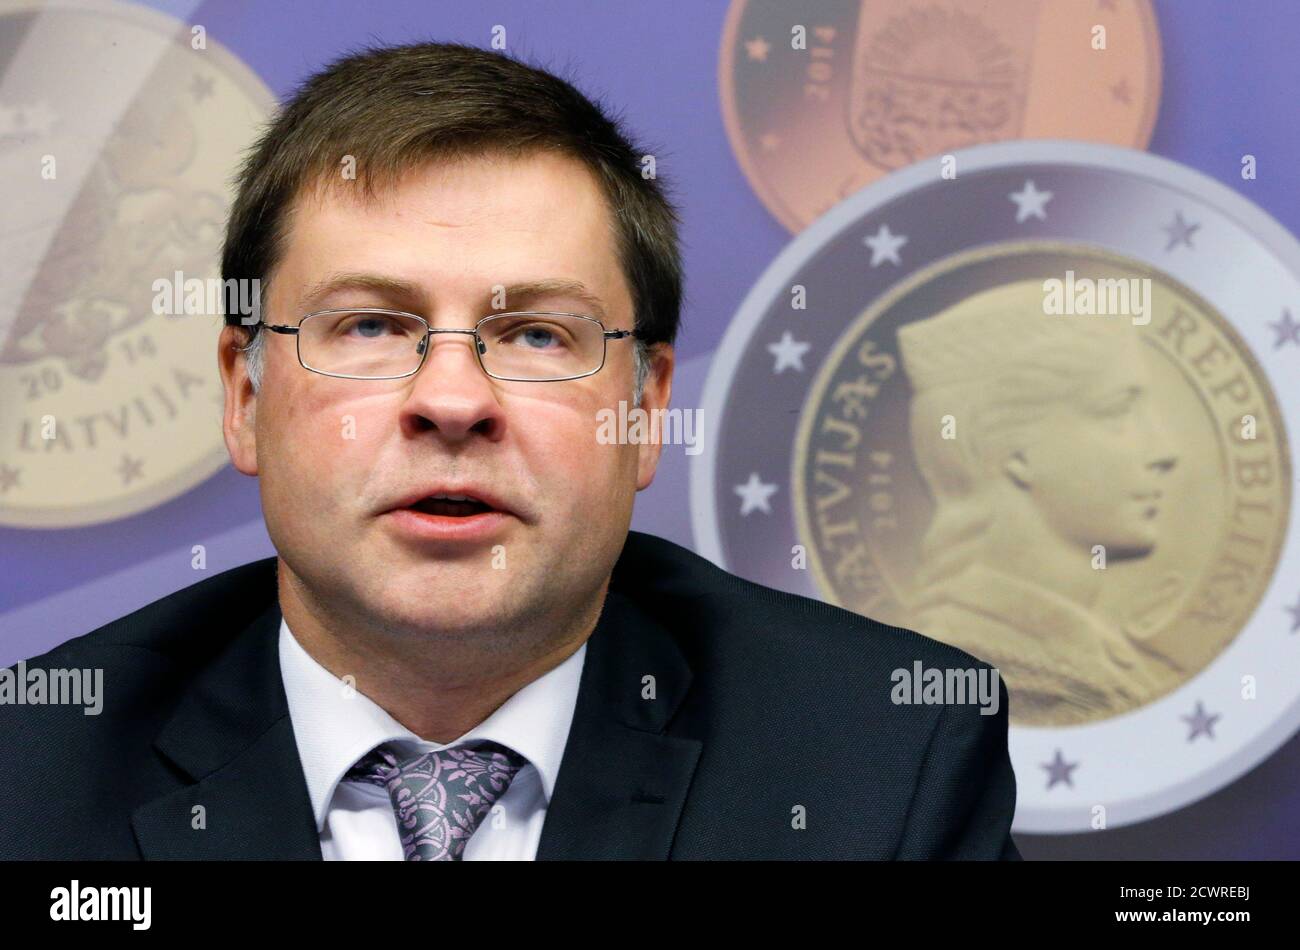 Latvia's Prime Minister Valdis Dombrovskis addresses a news conference on the adoption of the euro by Latvia at the European Union council building in Brussels July 9, 2013. The euro zone embraced tiny Latvia as its newest member on Tuesday, eager to show that the bloc is not disintegrating while doubts remain about southern Europe's ability to overcome more than three years of crisis.   REUTERS/Francois Lenoir (BELGIUM - Tags: POLITICS BUSINESS HEADSHOT) Stock Photo